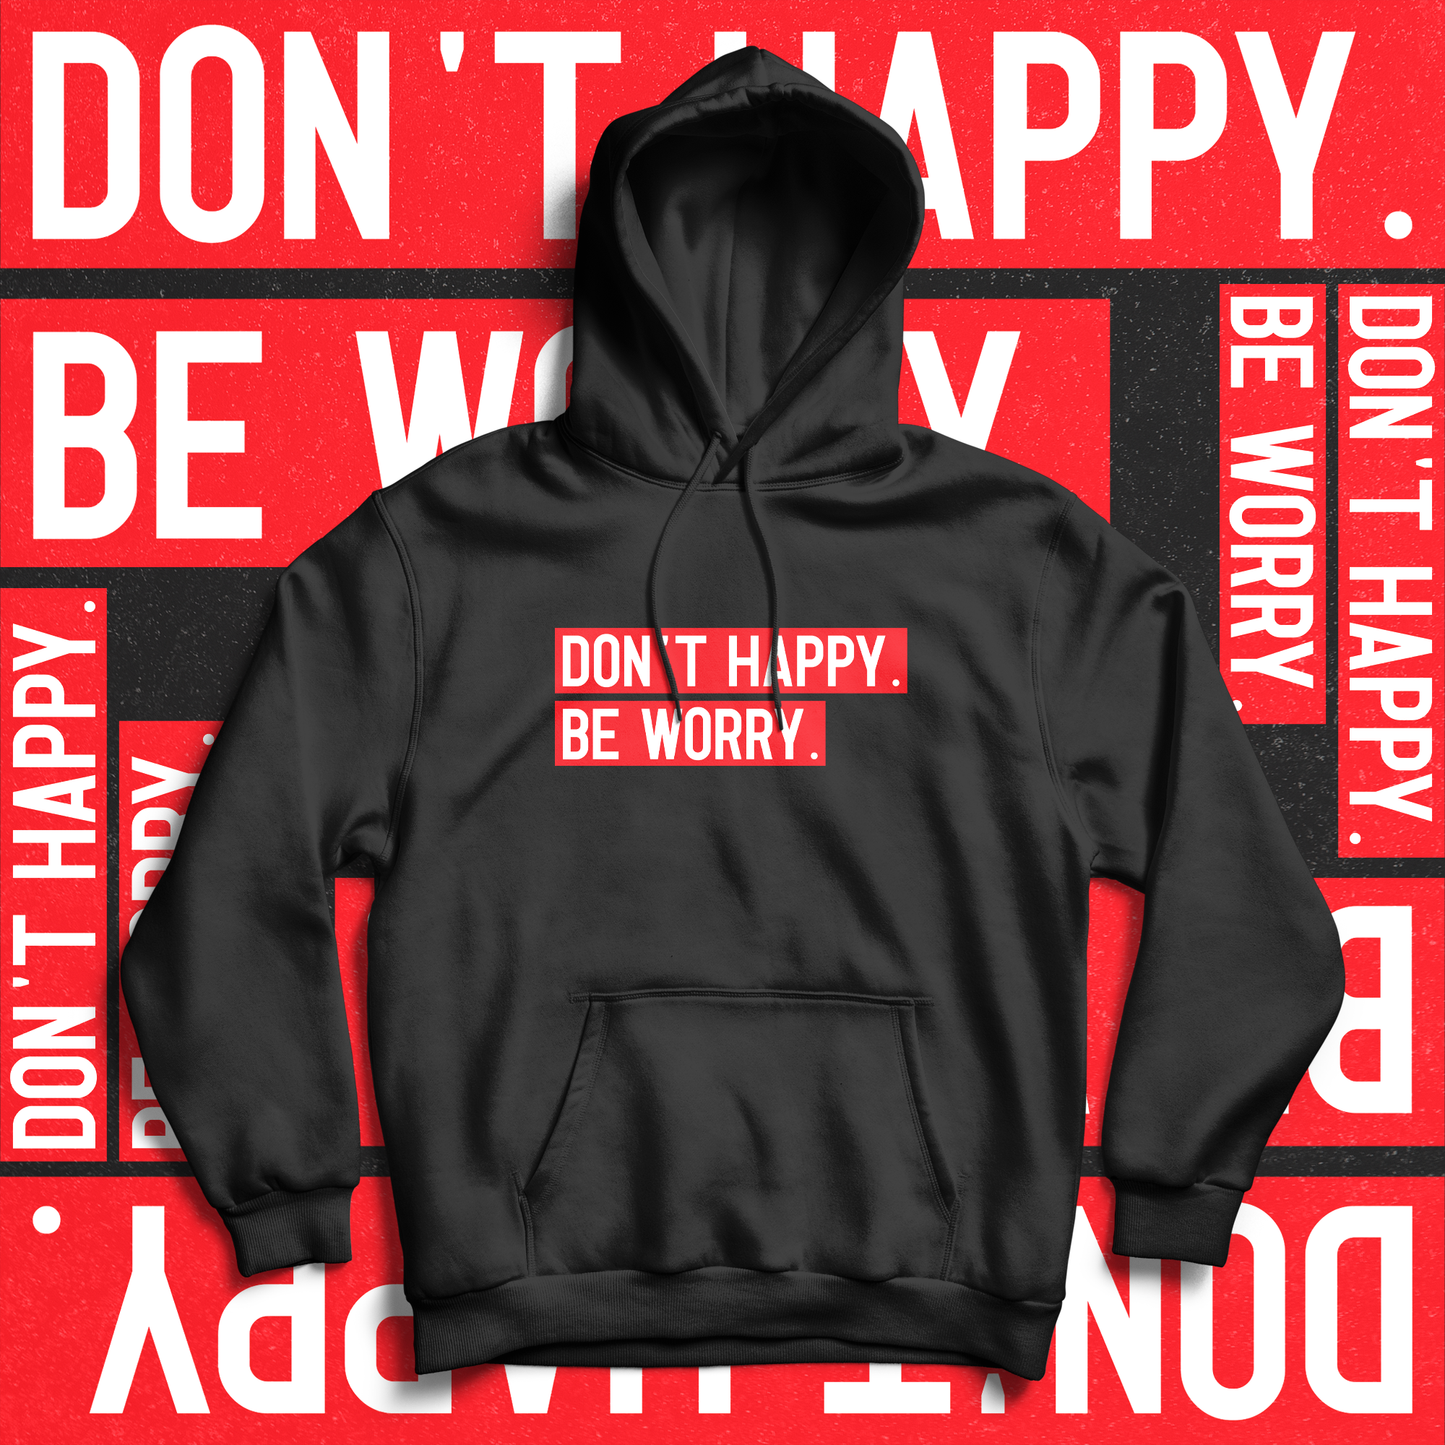 Don't Happy. Be Worry. Hoodie